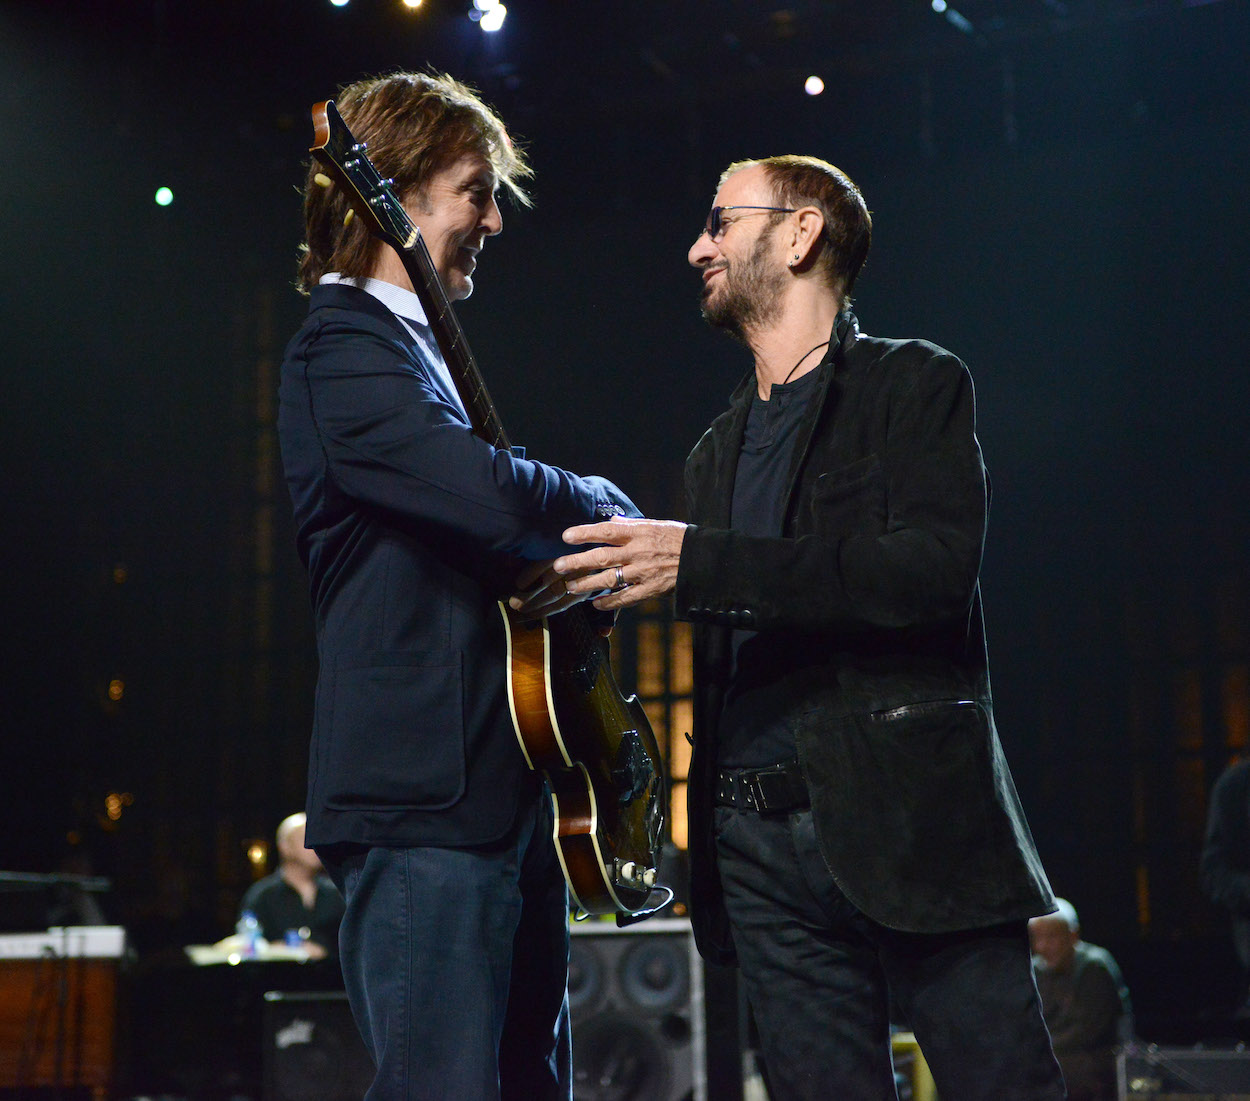 Paul McCartney (left) and Ringo Starr at Ringo's 2015 Rock & Roll Hall of Fame induction, nearly 20 years after Paul wrote a song for Ringo's ex-wife but didn't name it after her.